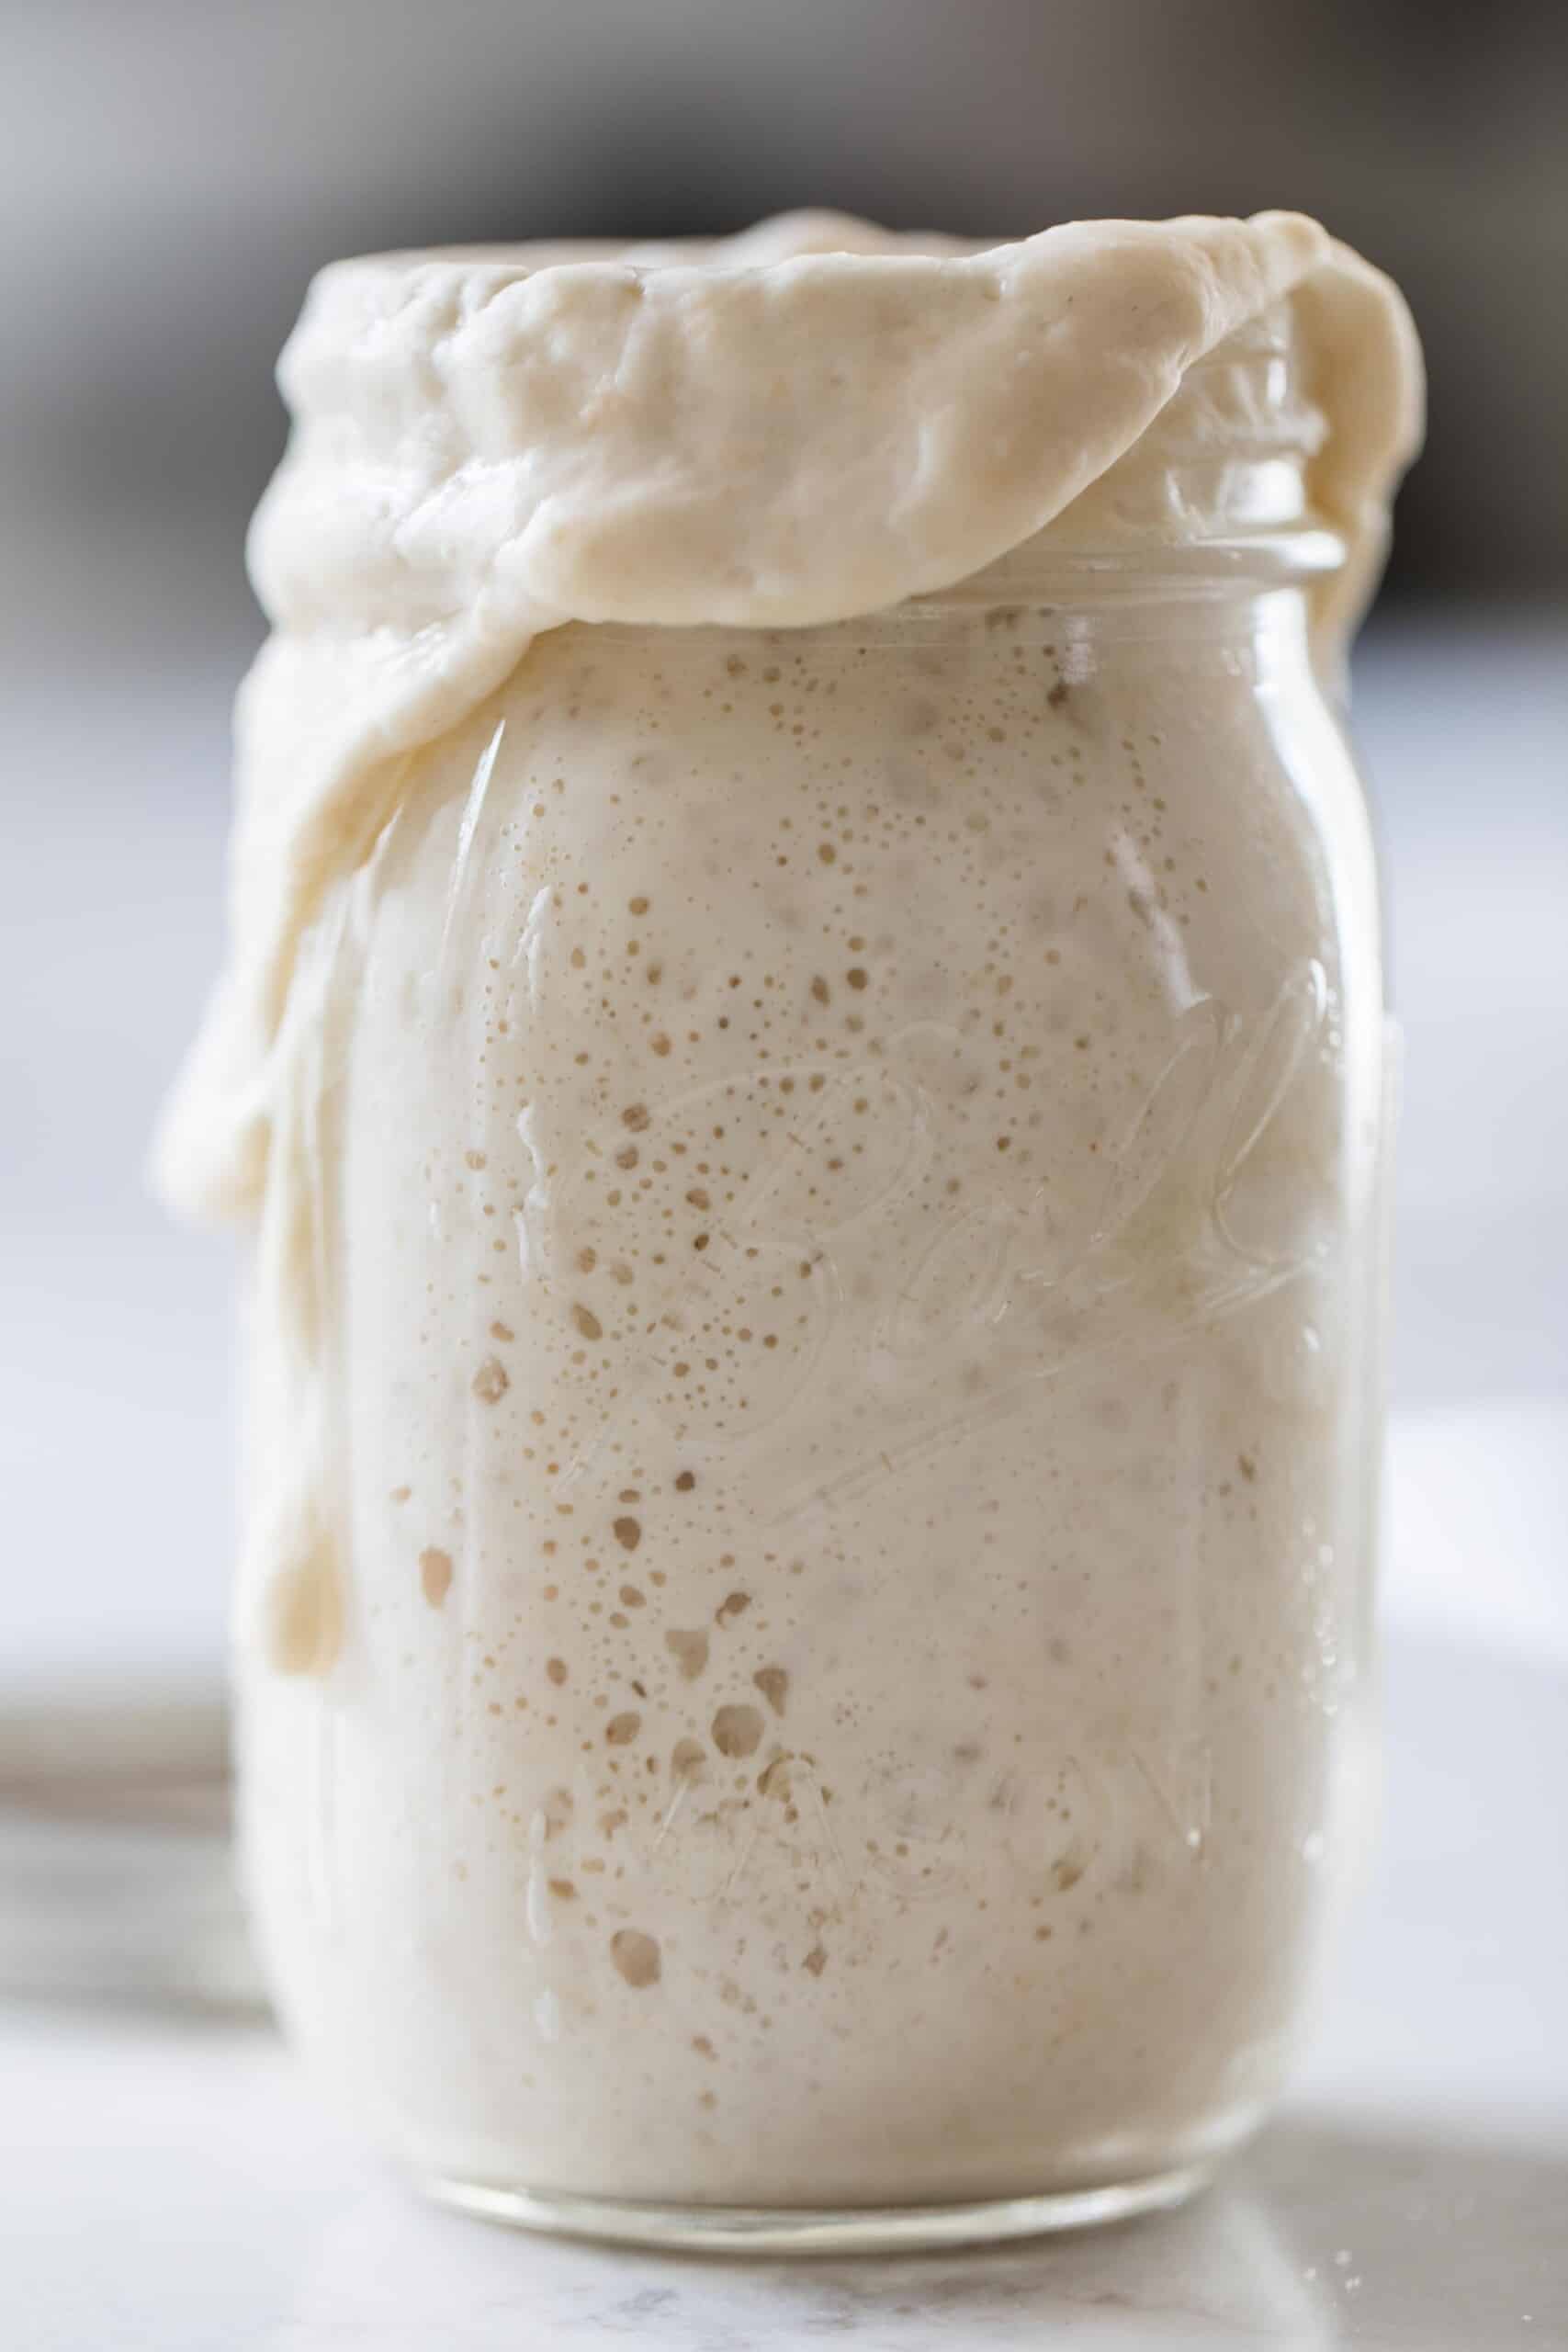 bubbly overflowing sourdough starter a white countertop